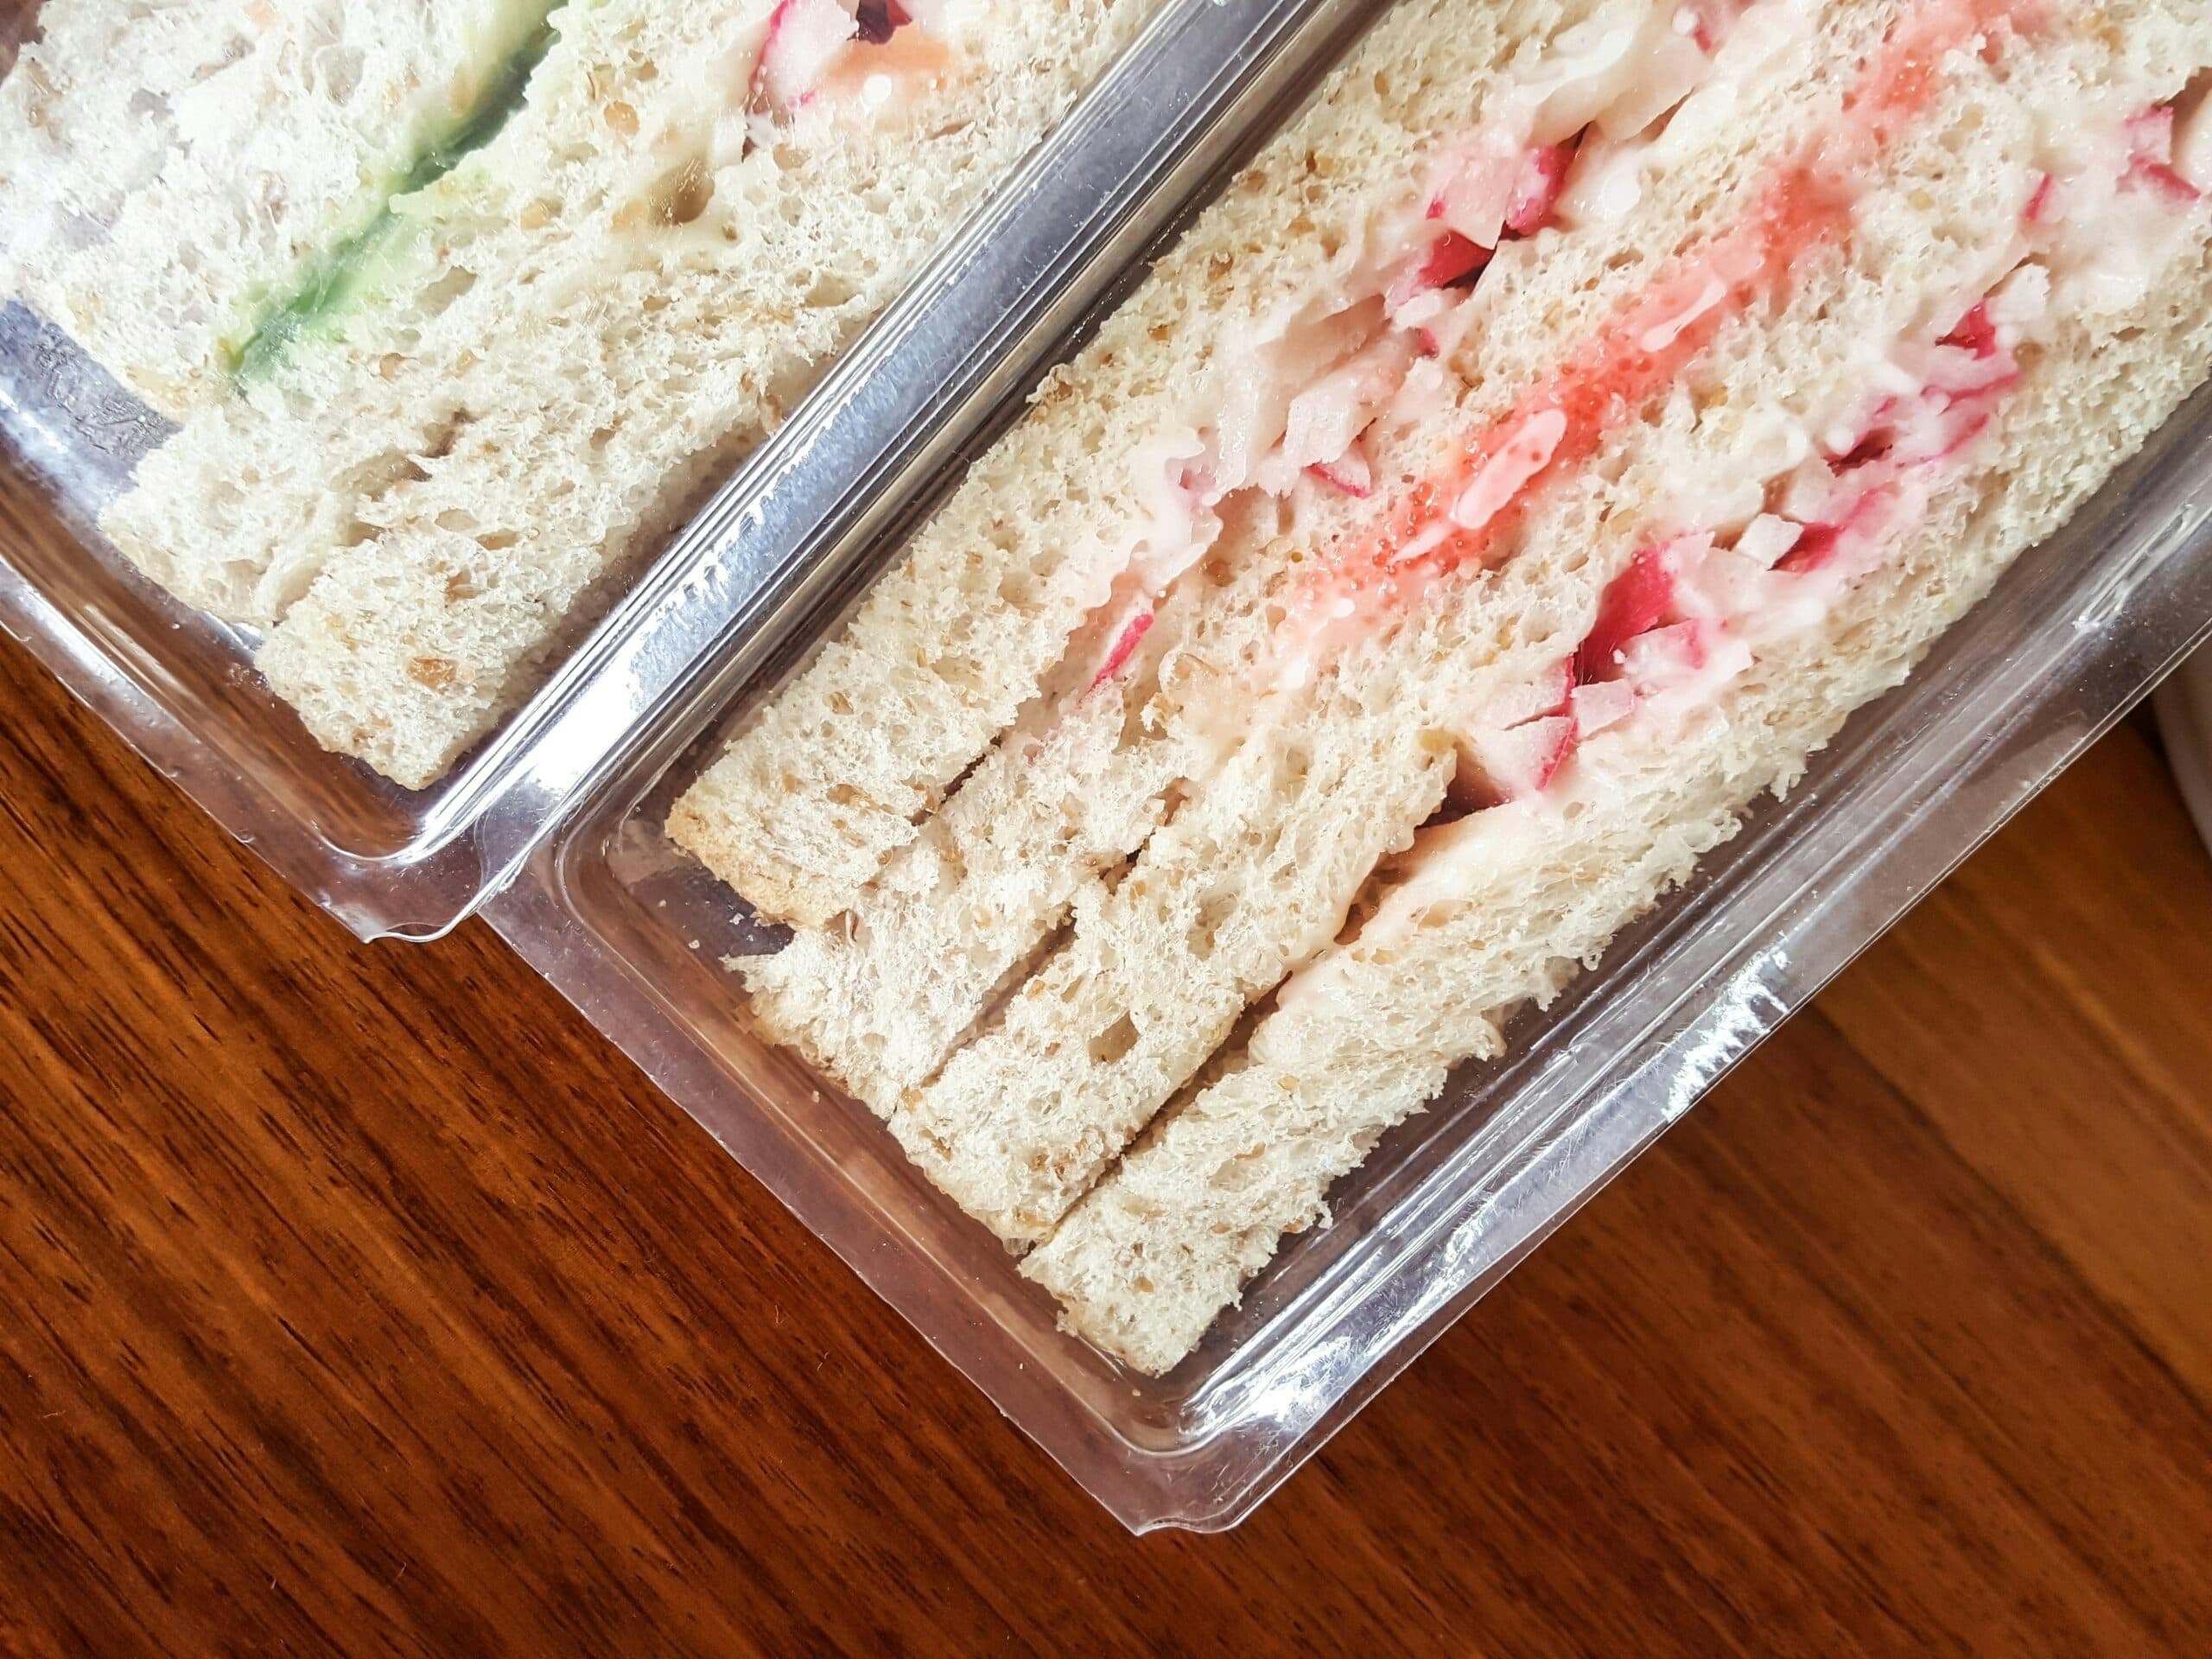 How to detect the smallest leaks in your sandwich packaging